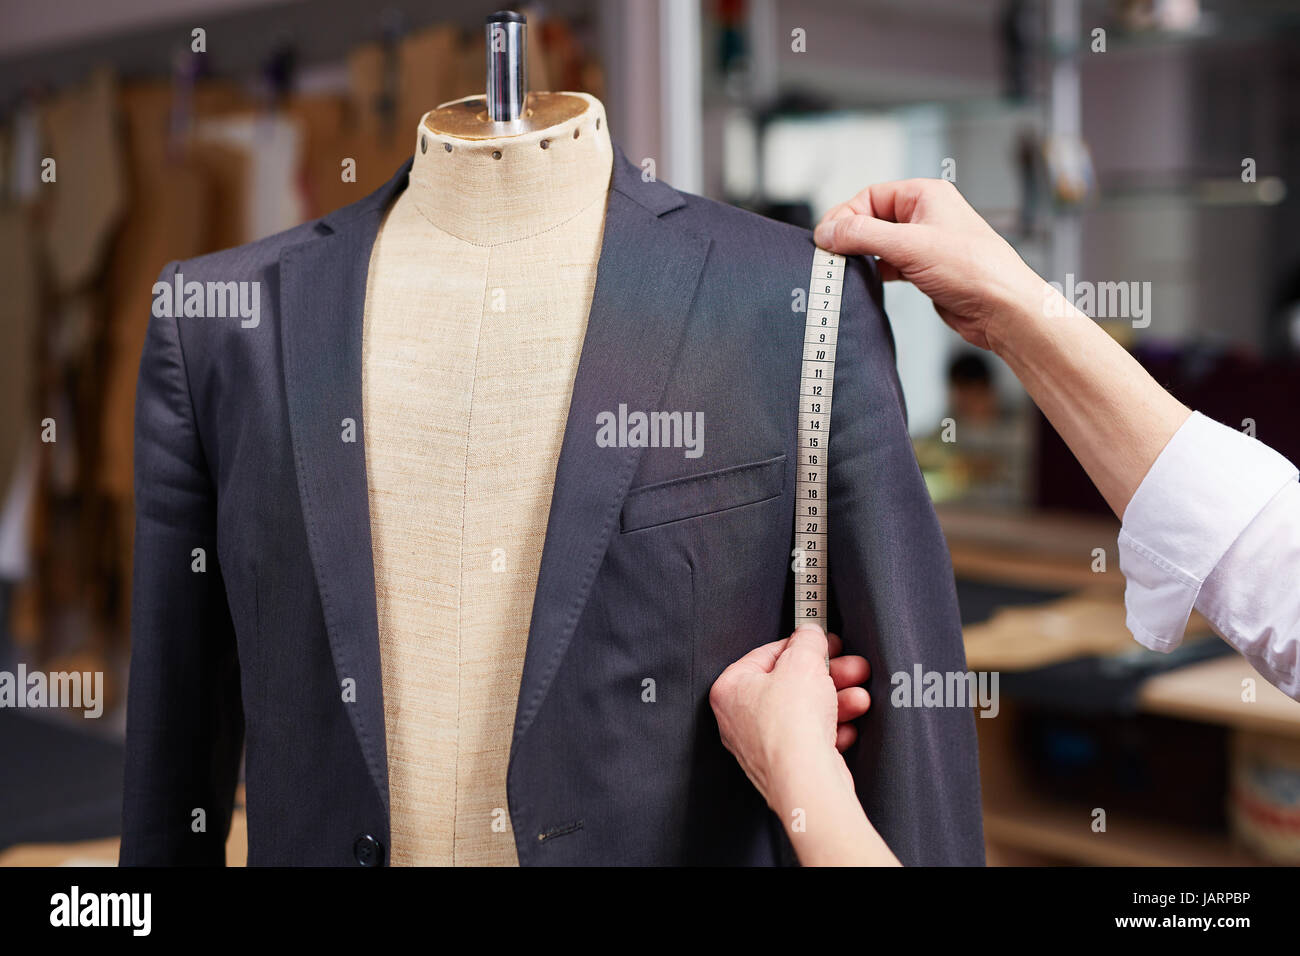 Tailored Suit in Atelier Stock Photo